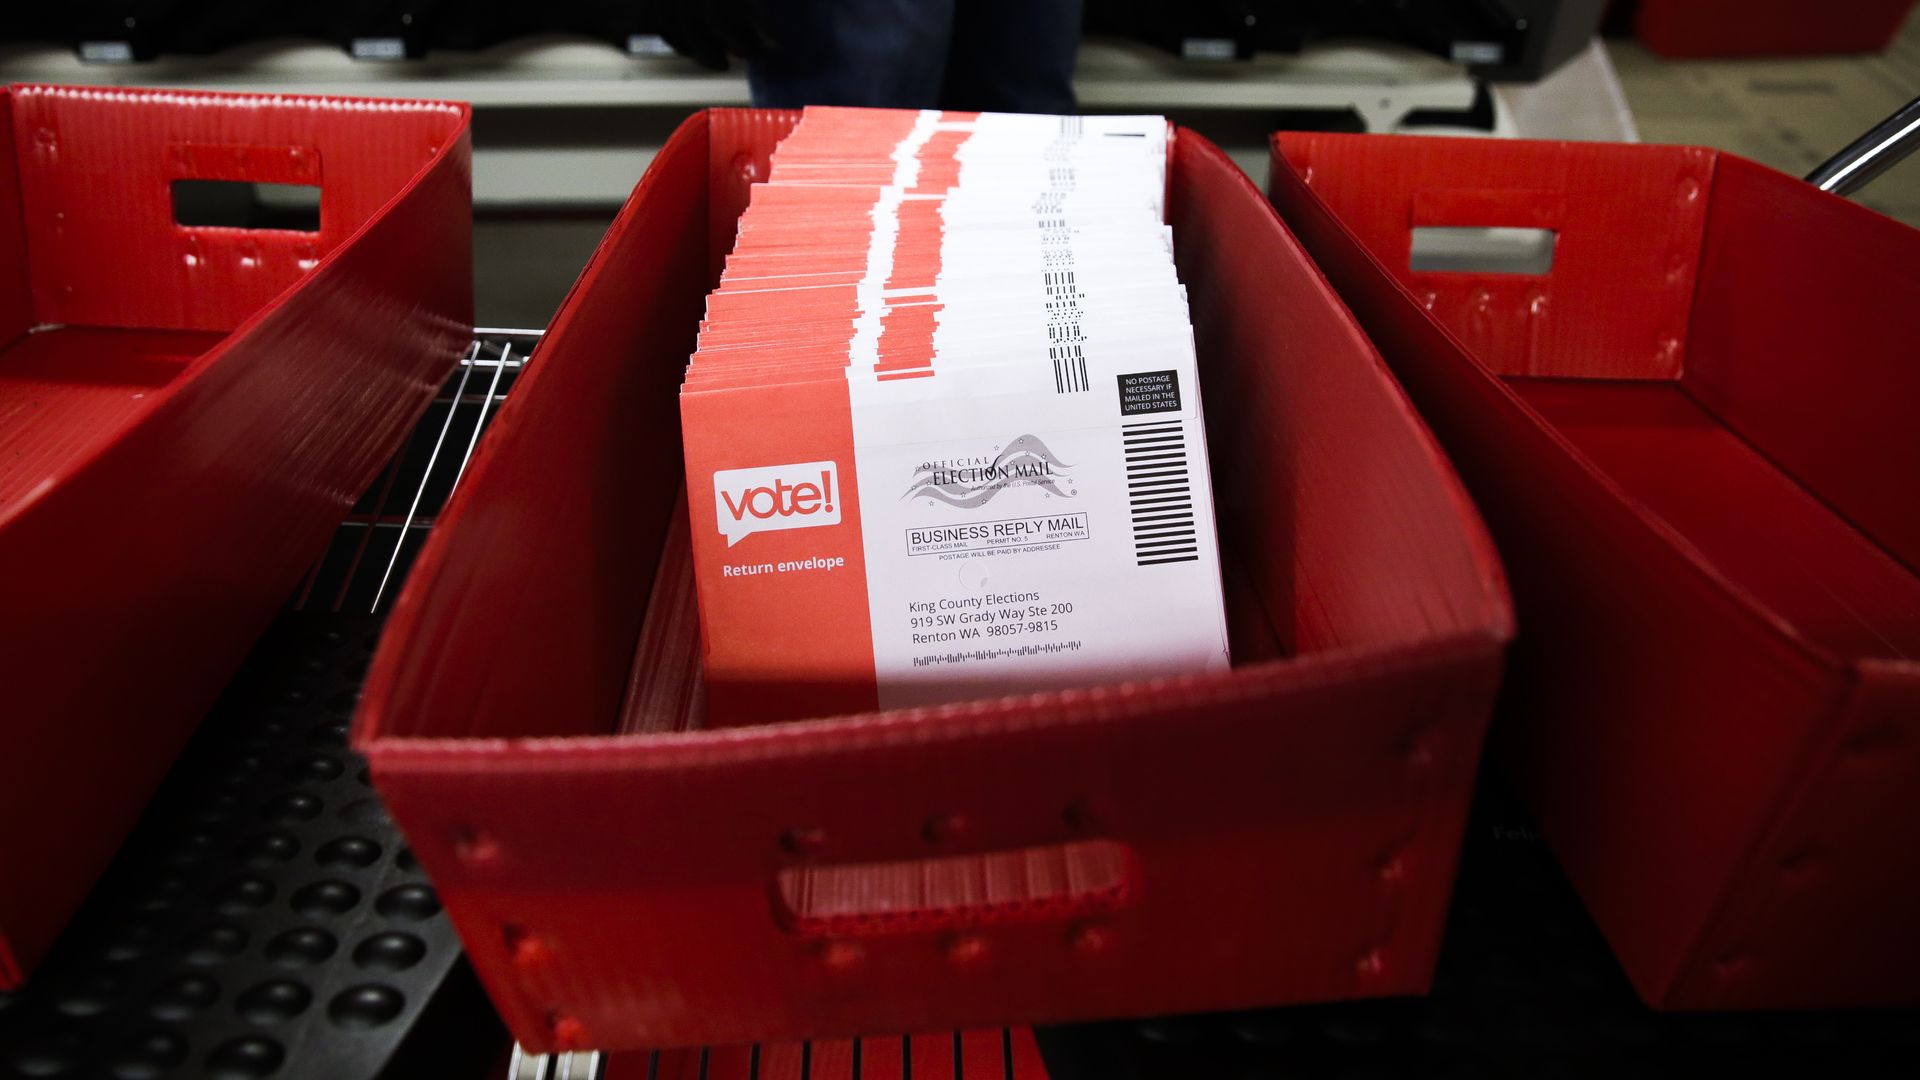 An up close photo of a red basket filled with red and white mail-in ballots.